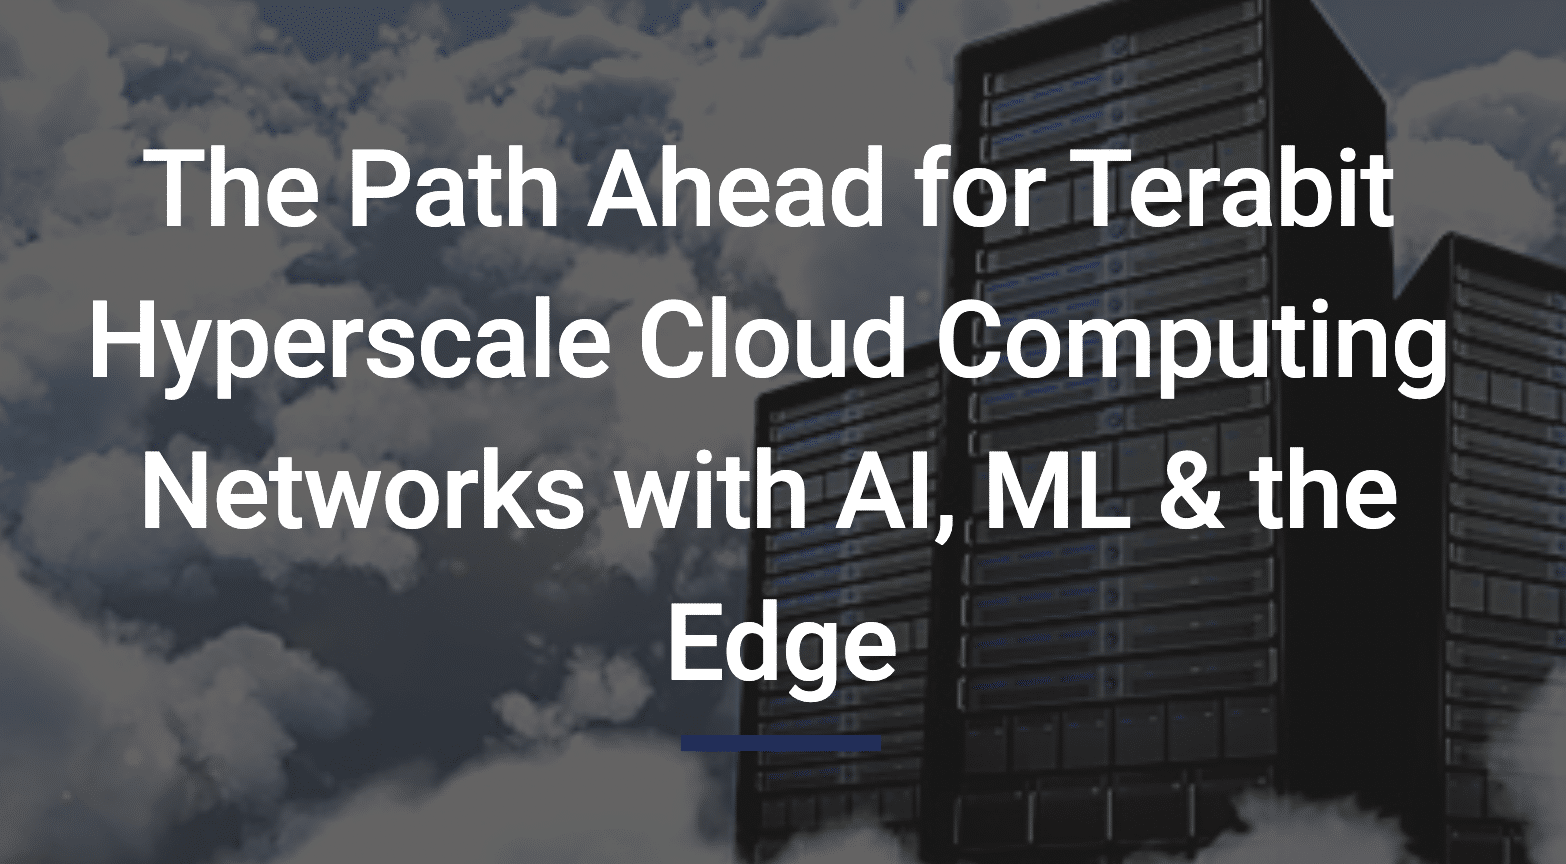 Panel Discussion: The Path Ahead for Terabit Hyperscale Cloud Computing Networks and the EDGE with AI & ML